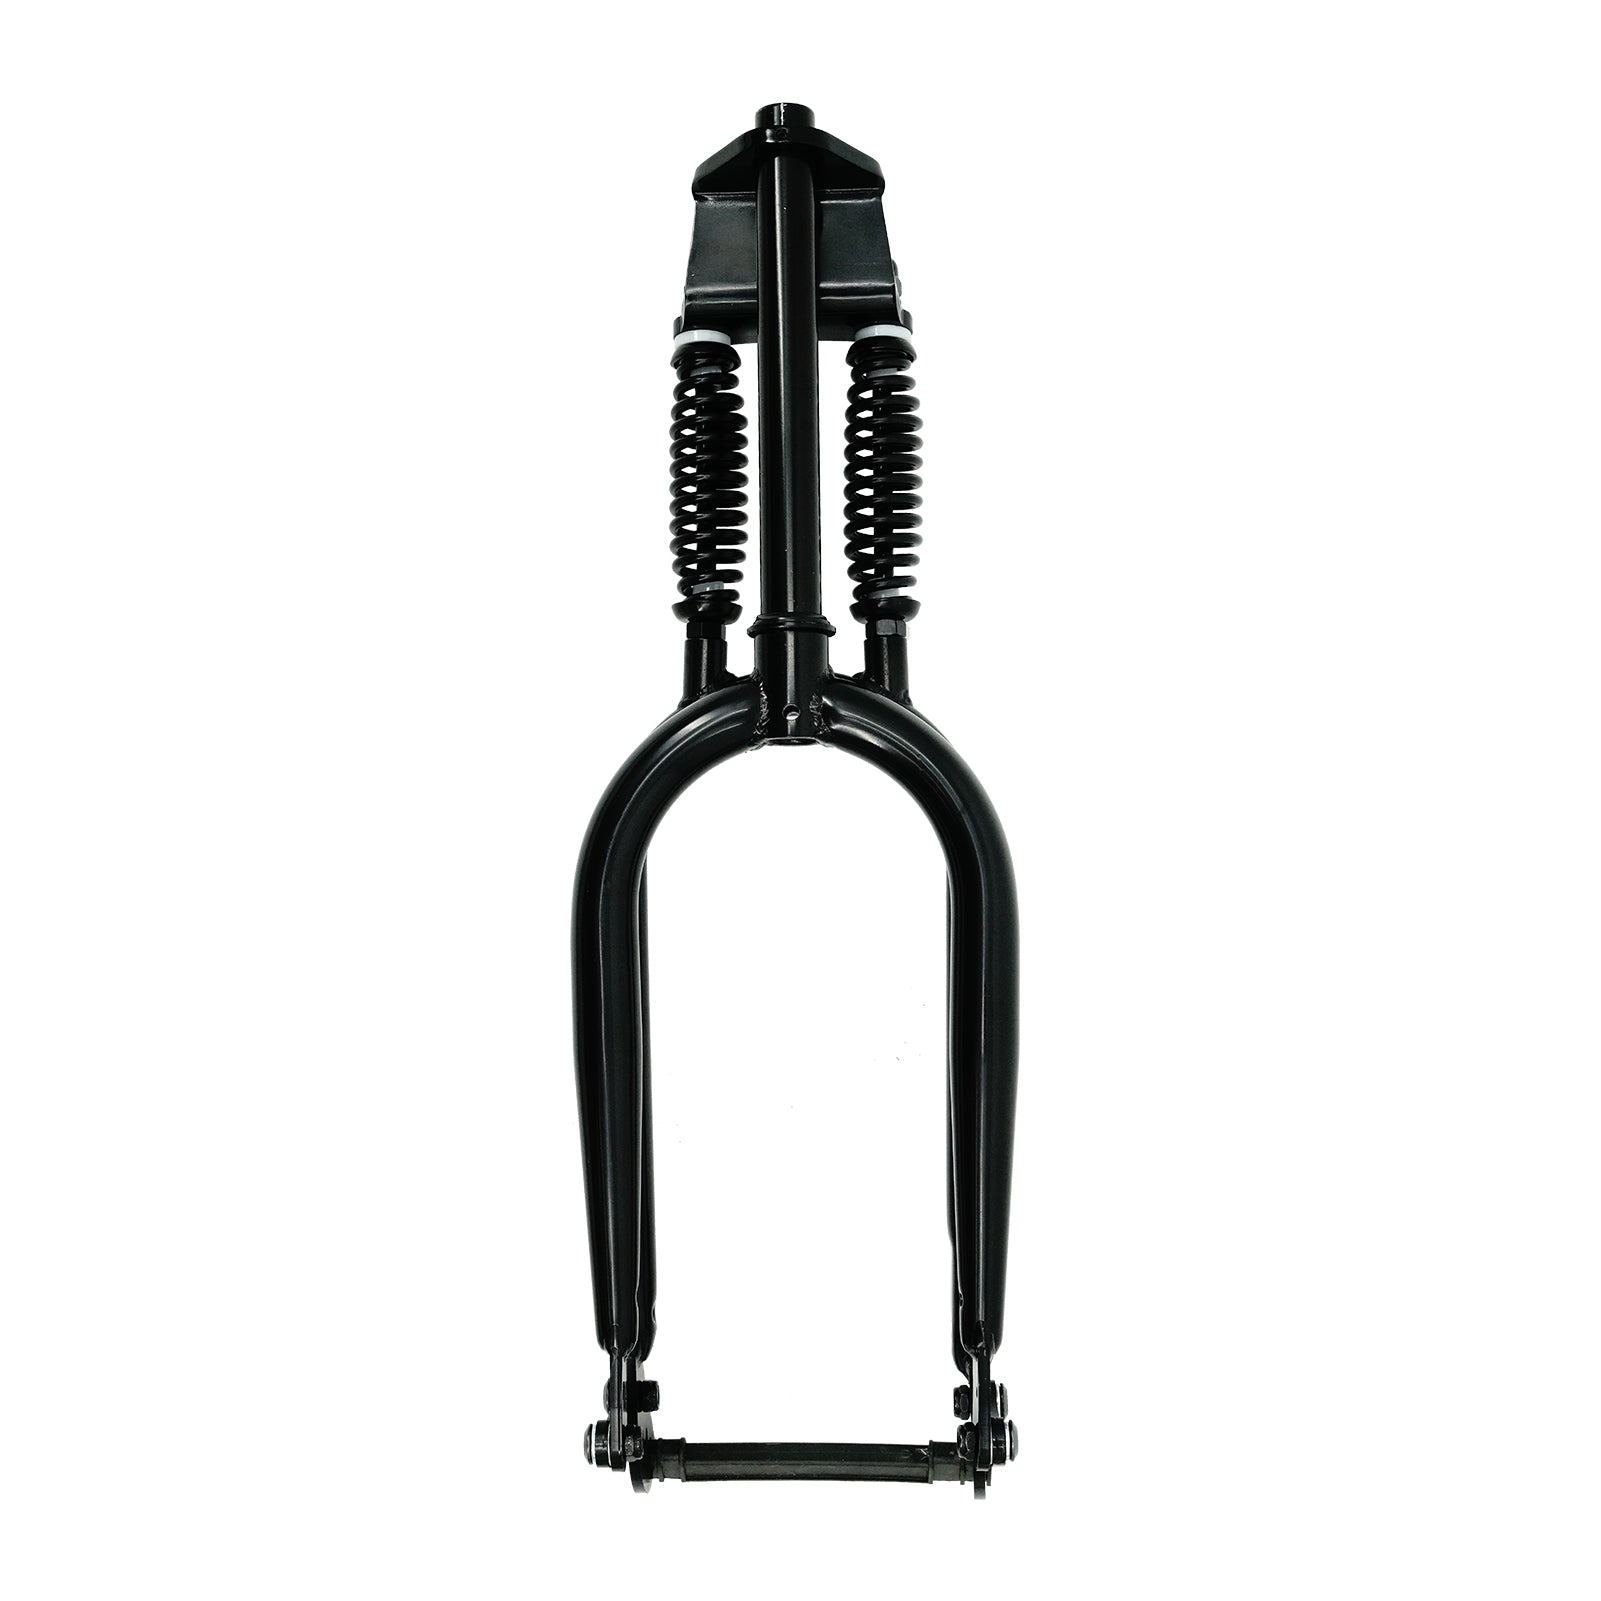 Tracer FK-DS20218135D 20'' Dual Classical Springer Fork with Disc Brake, For 3.0 FAT Tire 25.4mm